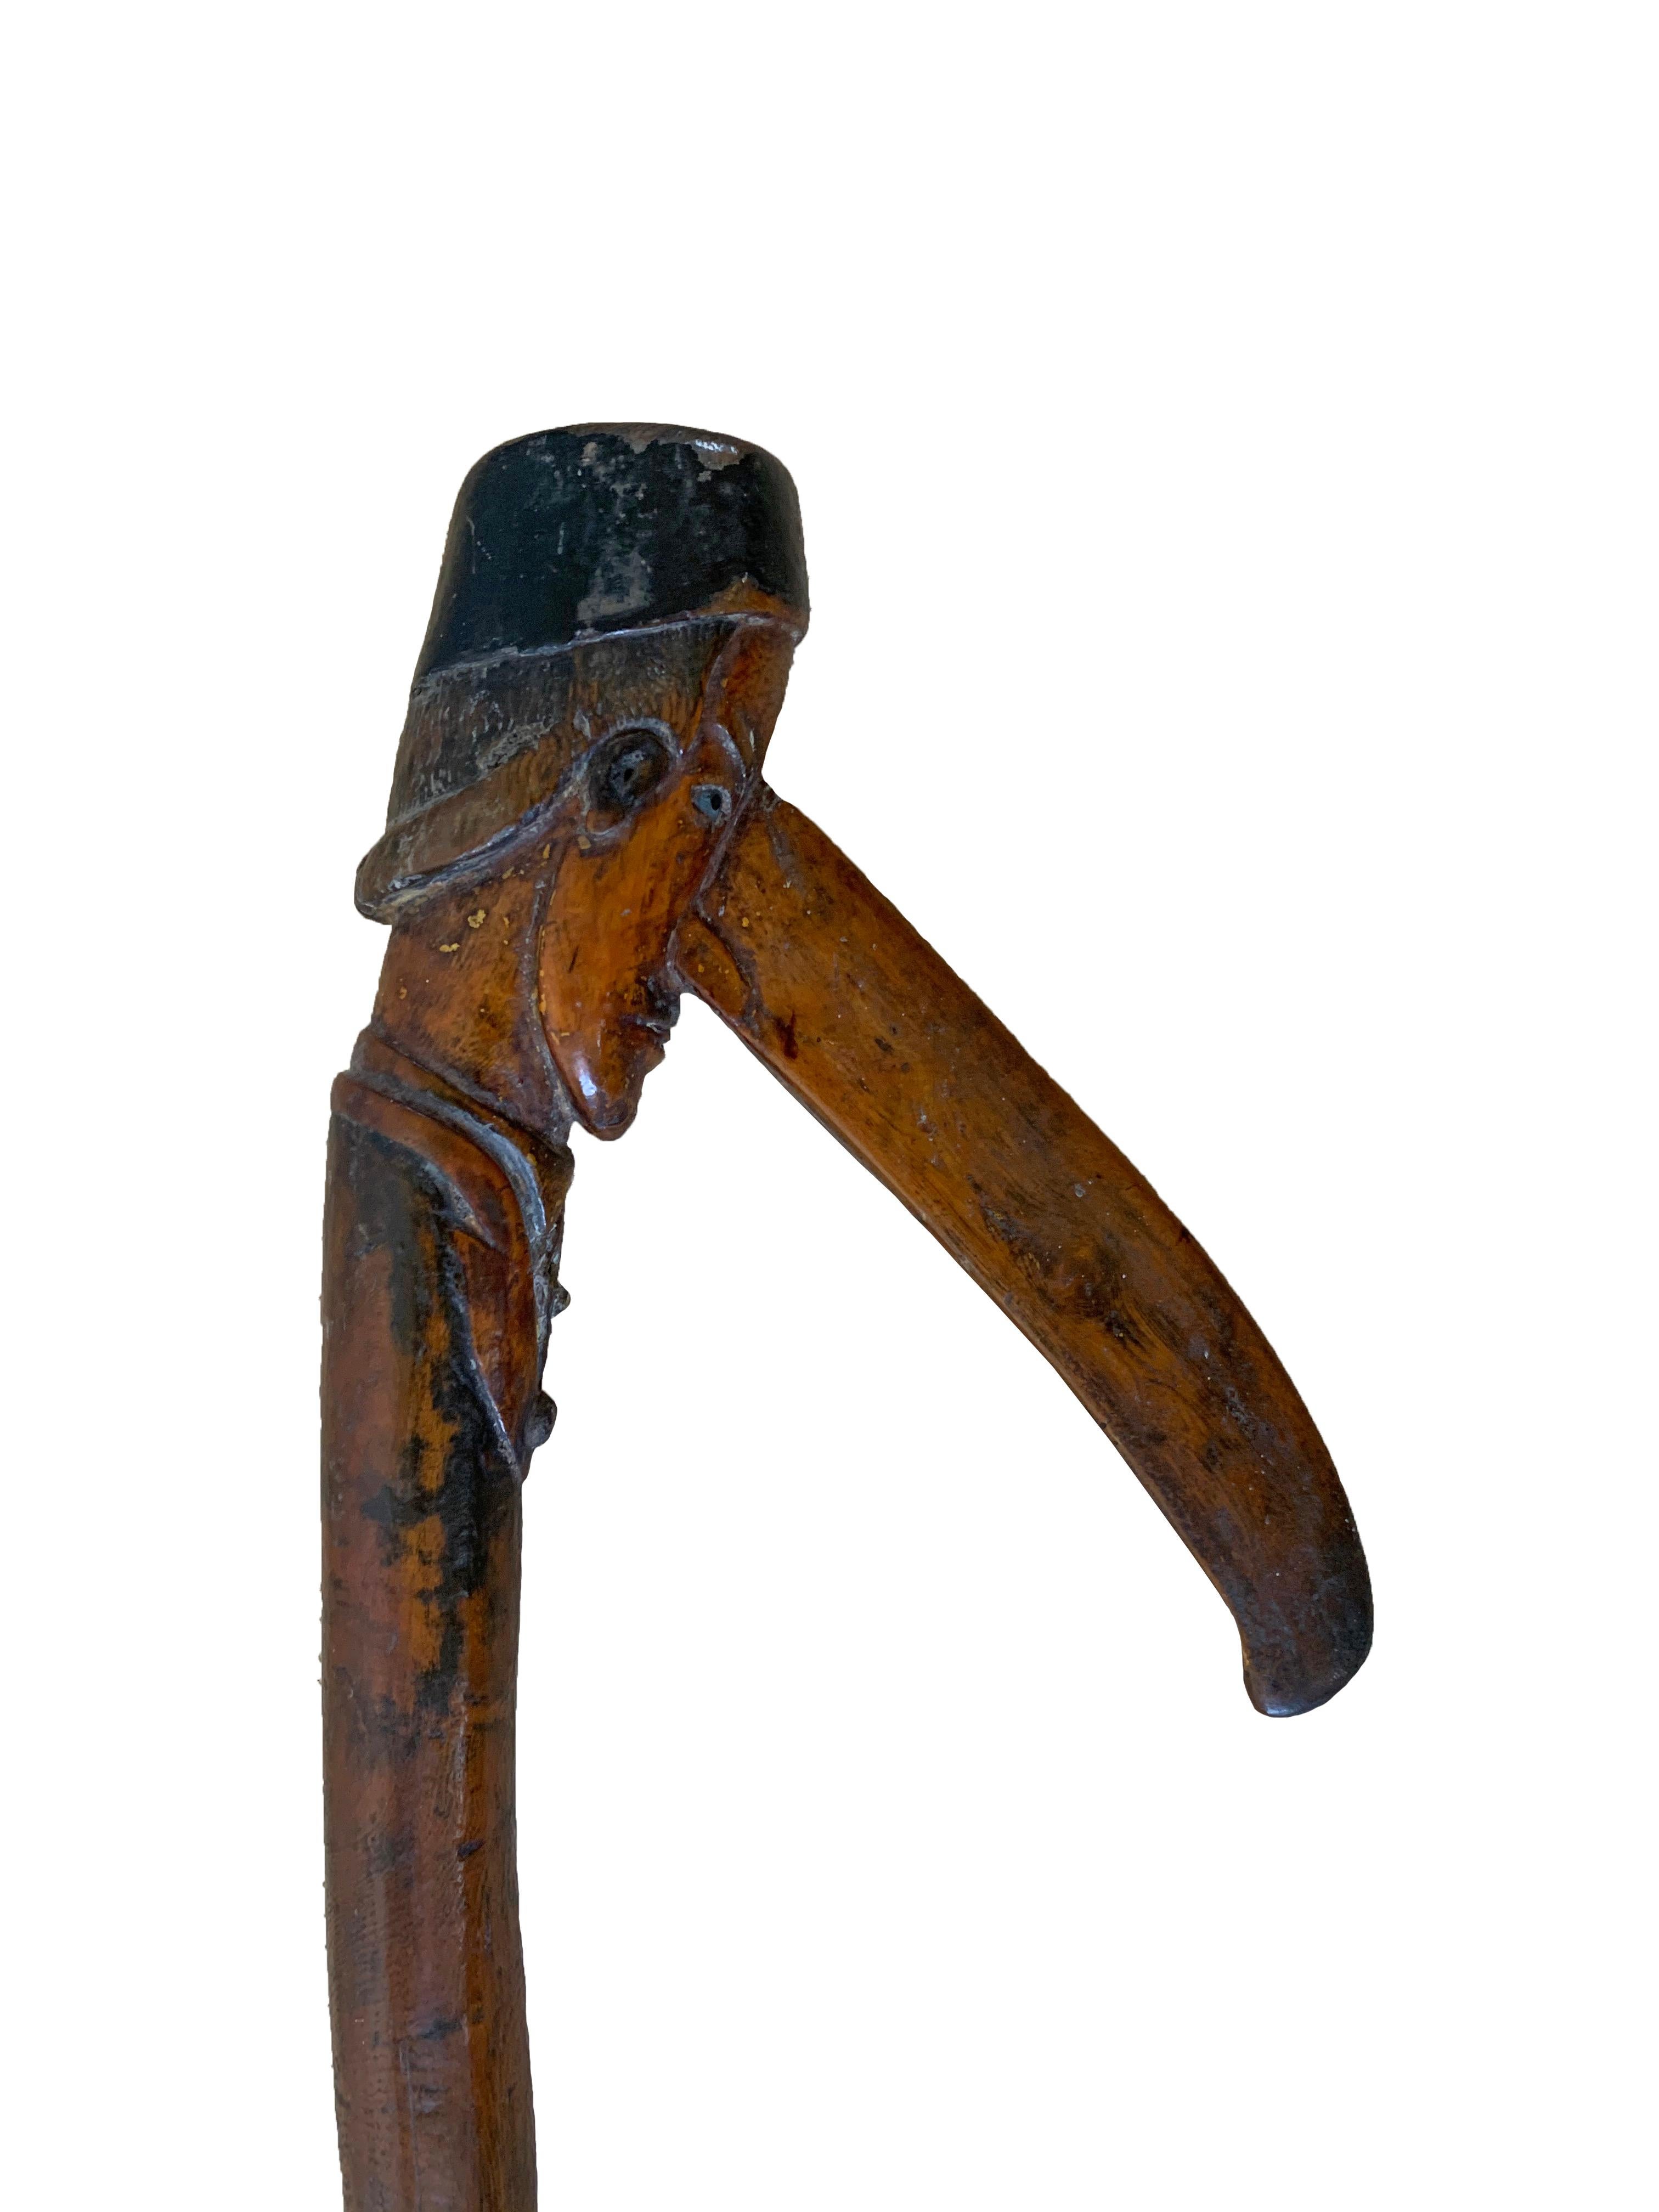 This hand-crafted walking stick originates from the island of Java, Indonesia around the turn of the 19th Century. It features hand-carved detailing of a male figure with an extraordinarily long nose. A unique item certain to invoke conversation.